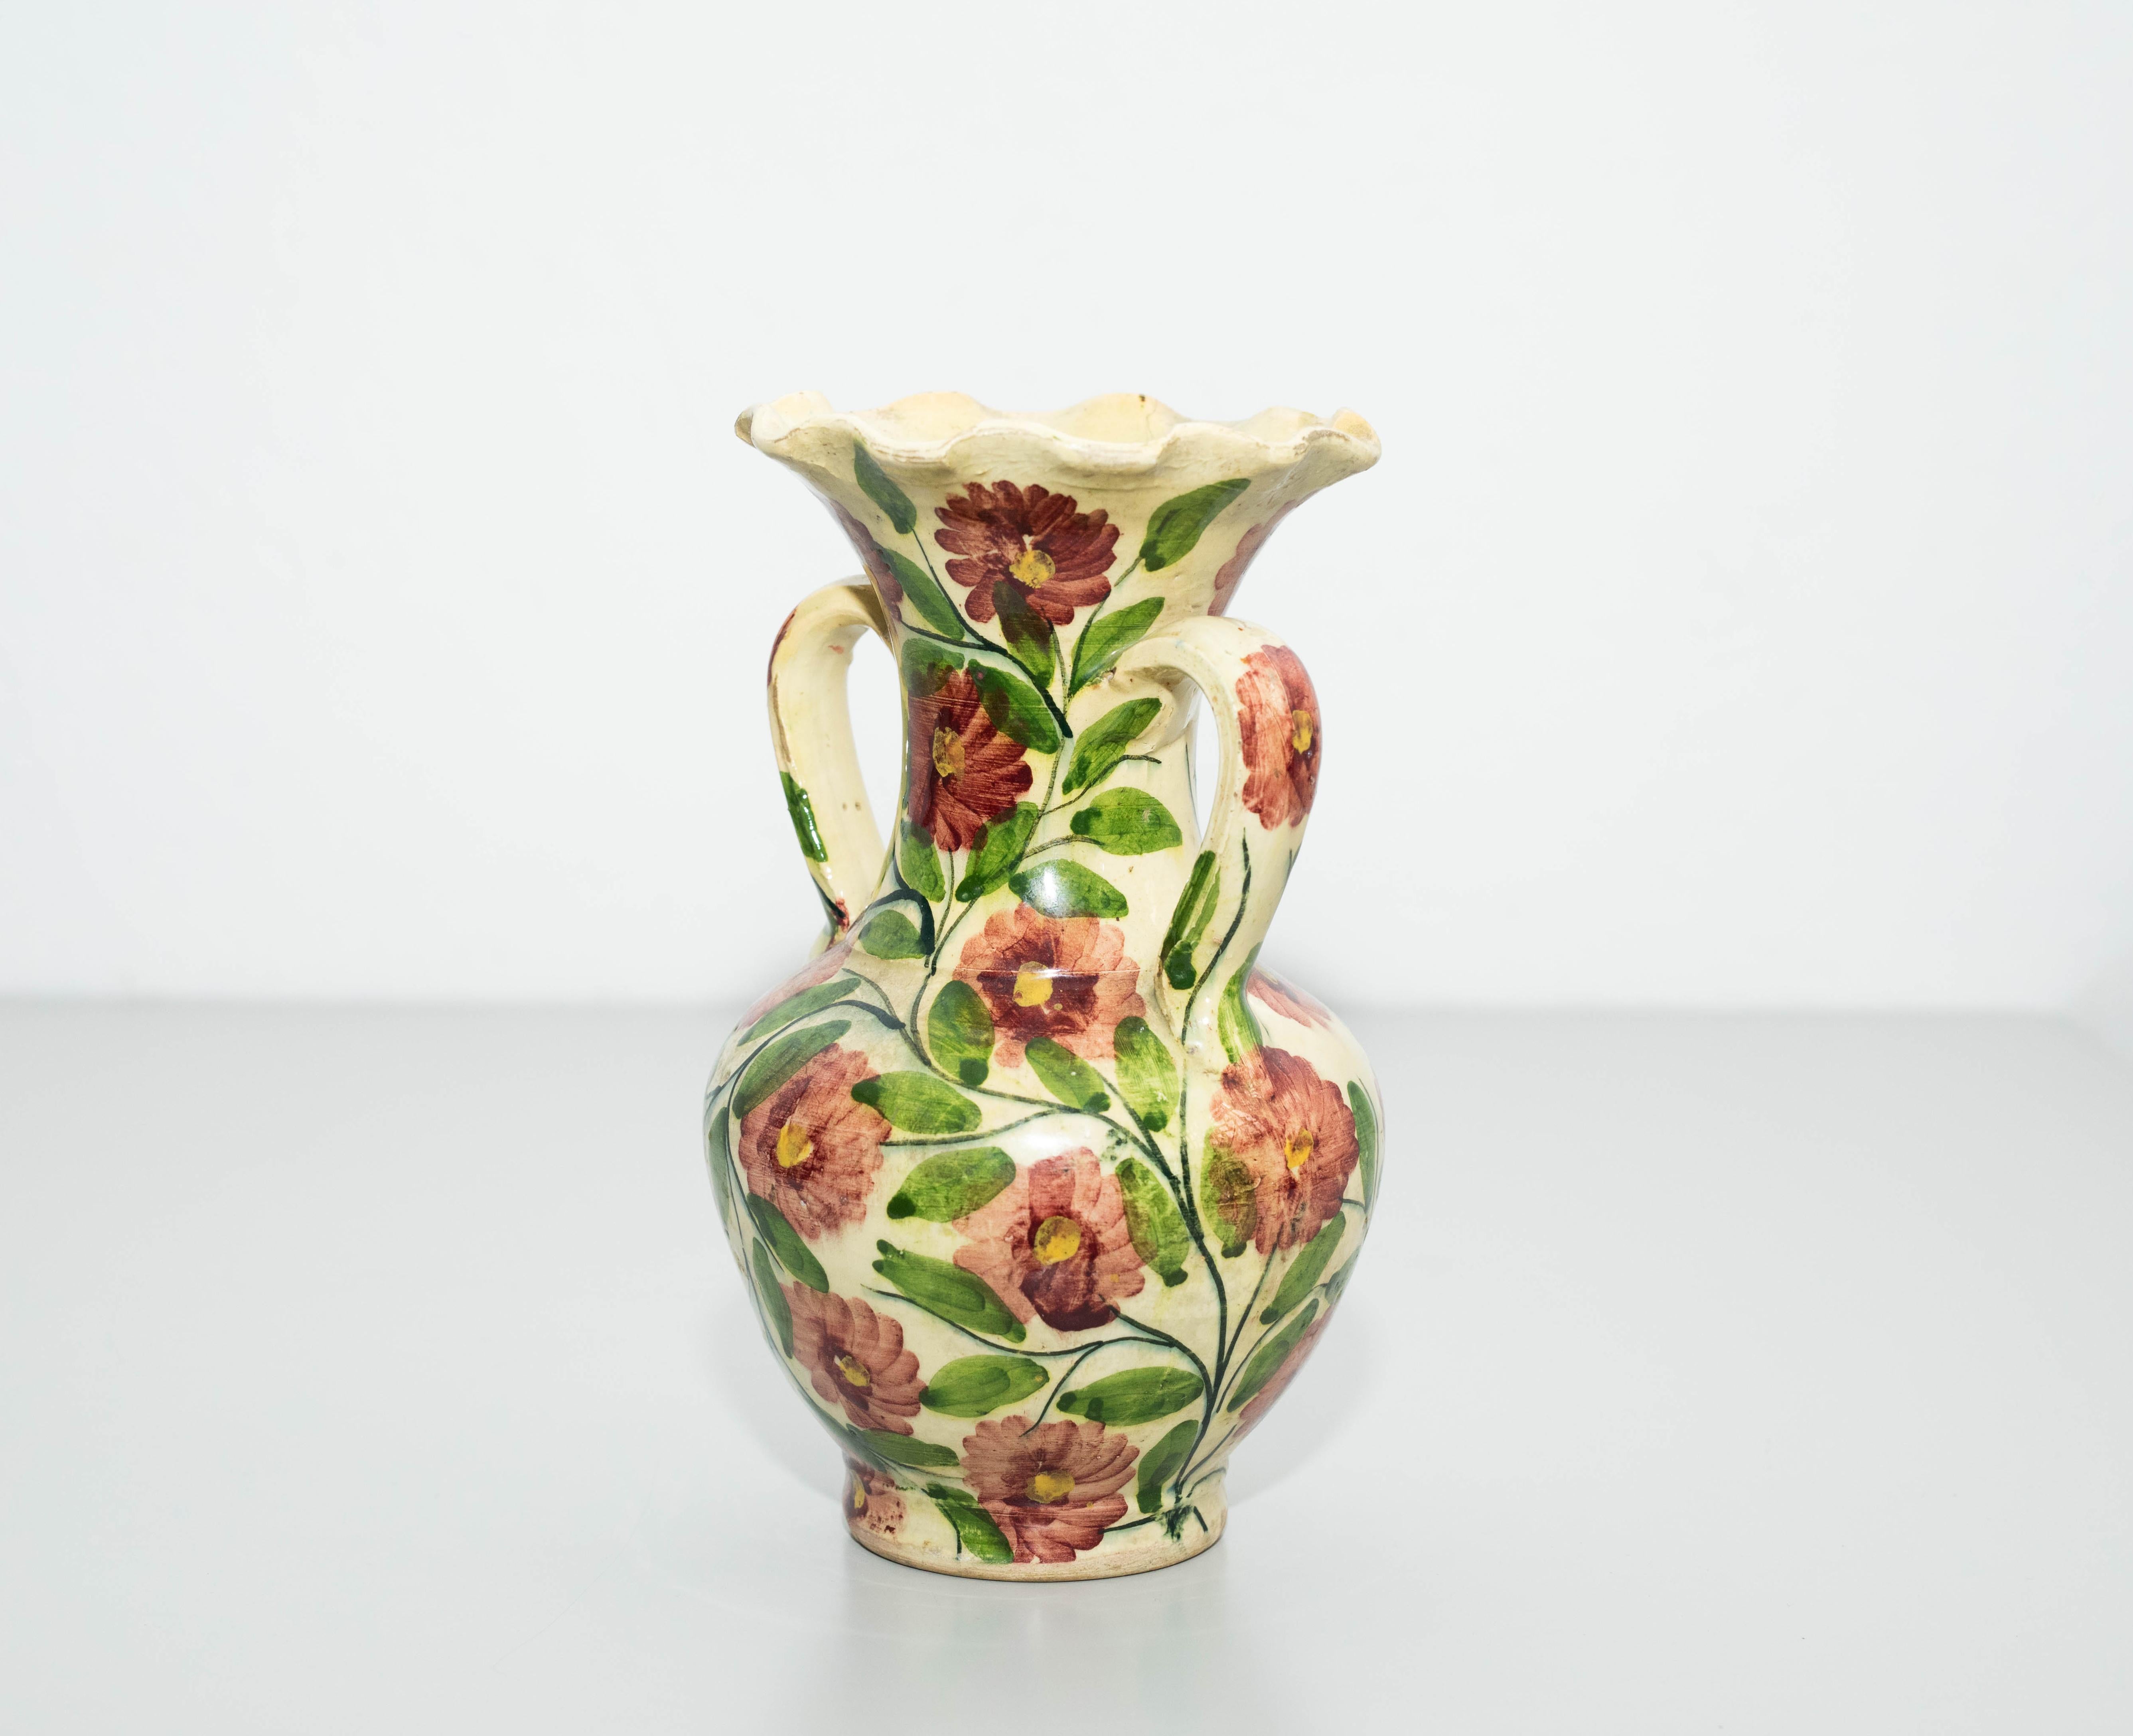 Ceramic hand painted flowers vase, circa 1960.

Add a touch of elegance to your space with this charming hand-painted floral ceramic vase, circa 1960. The intricate and delicate flower design brings a sense of timeless beauty to this vintage piece,